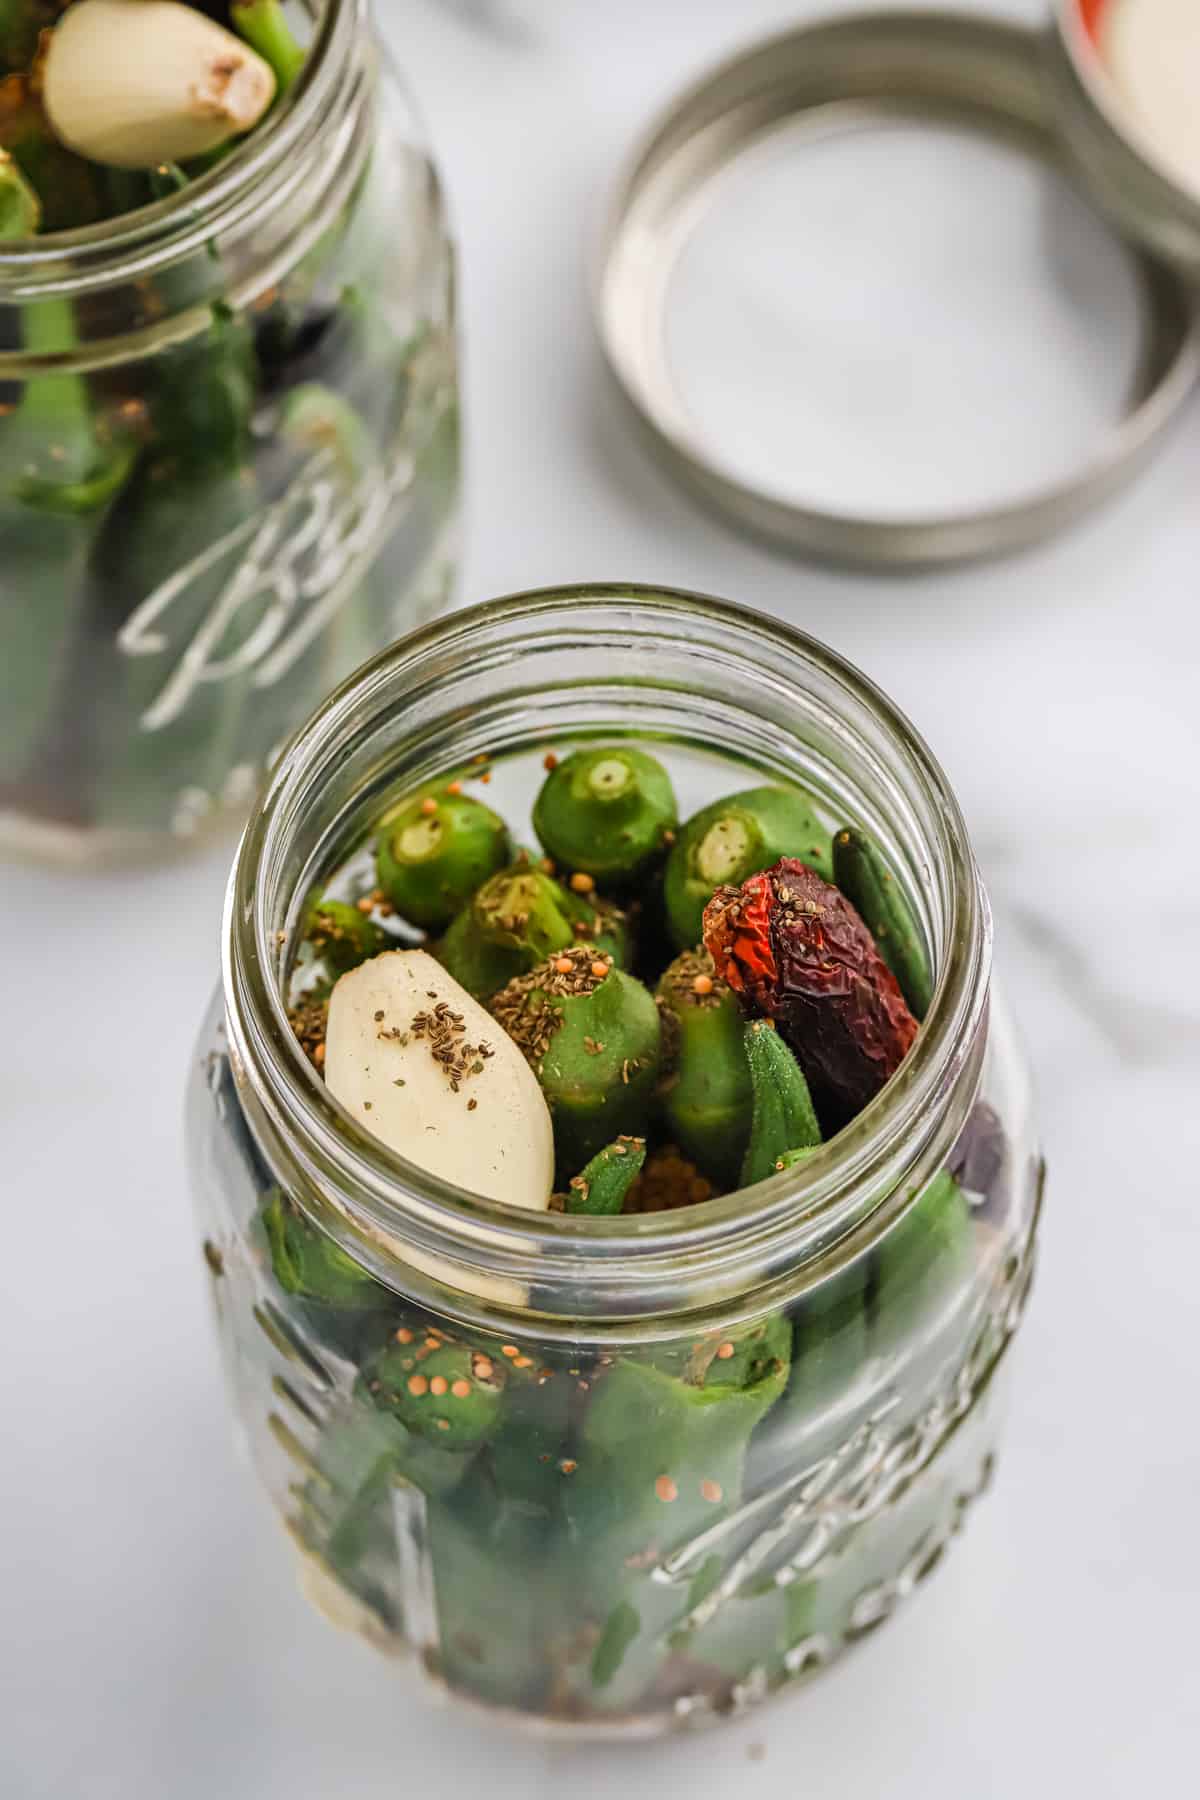 Okra packed into a jar with the spices being added.